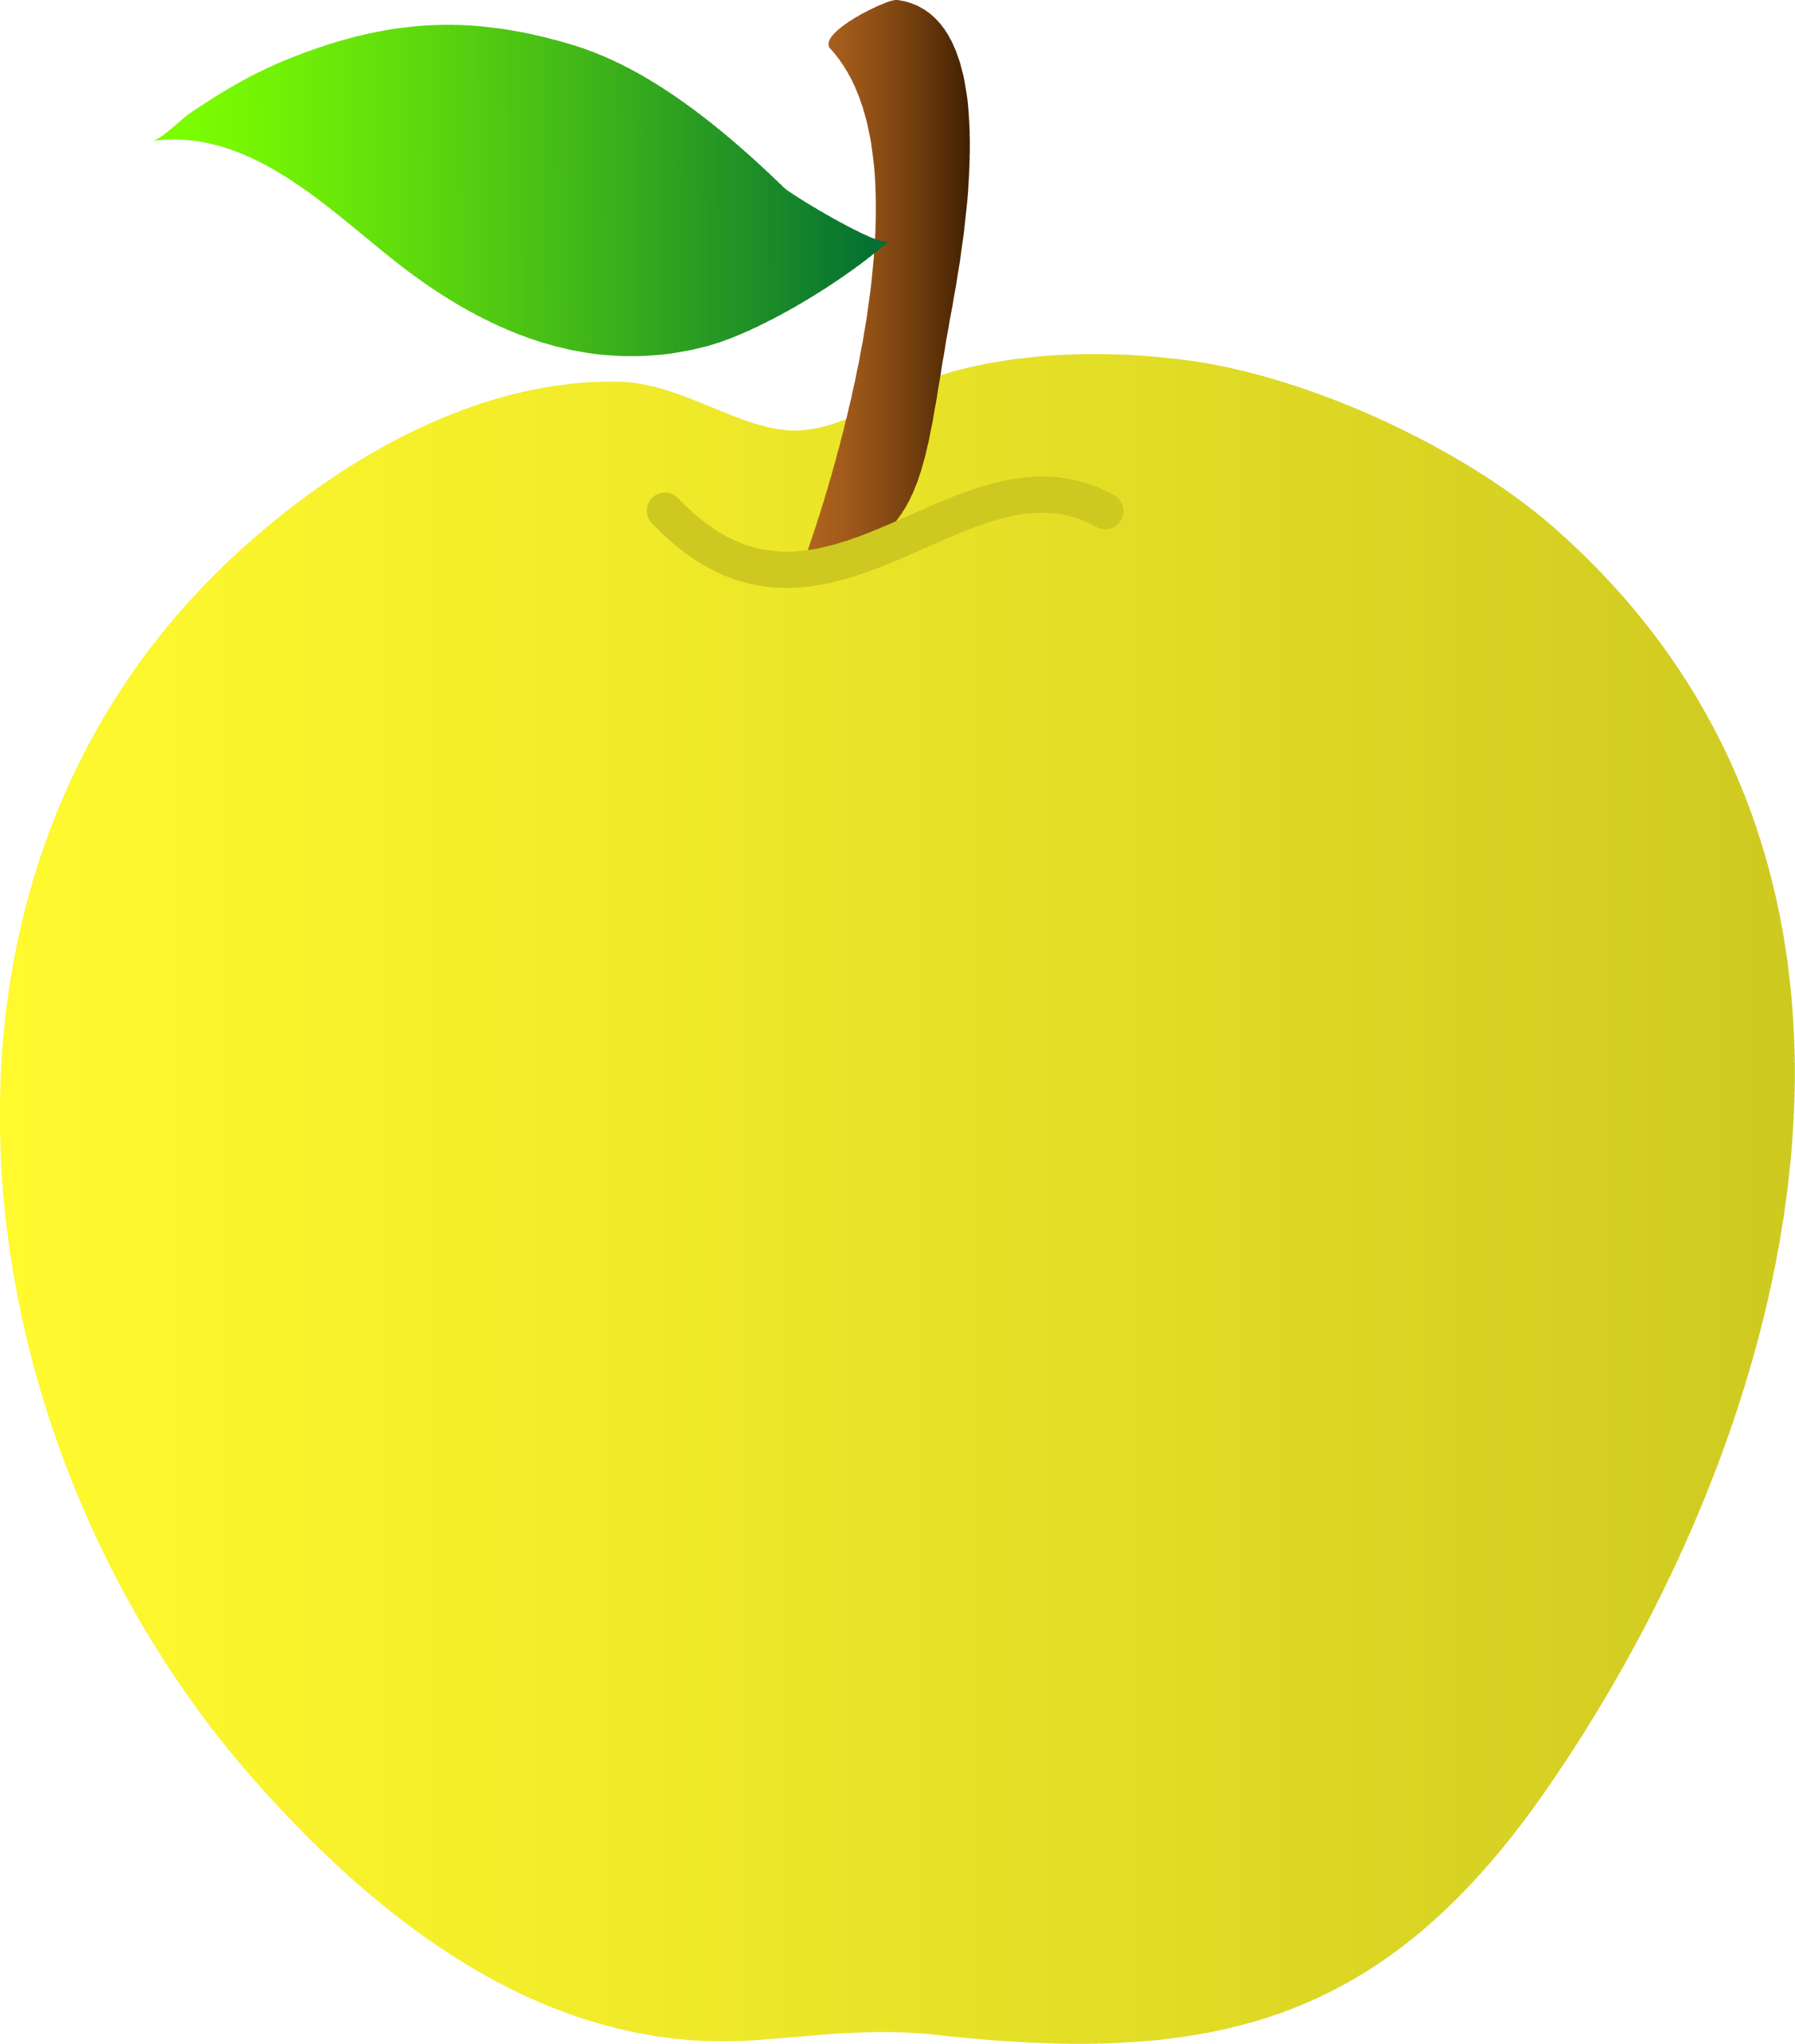 free clipart of apples - photo #37